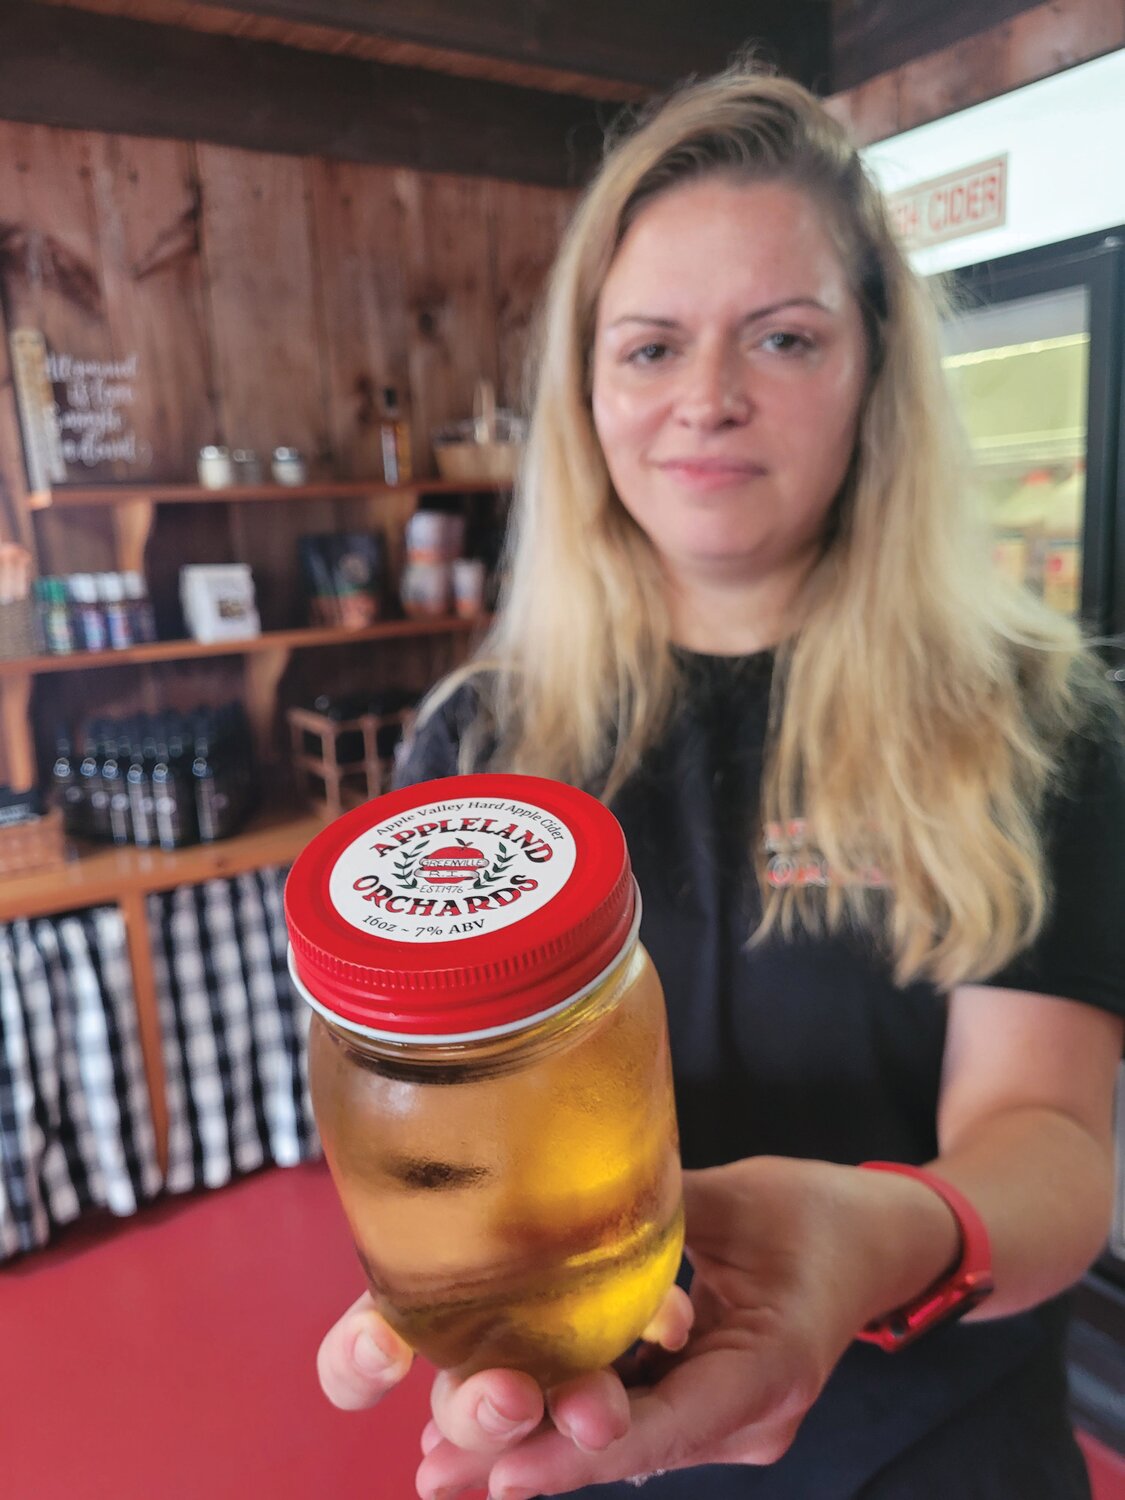 HARD WORK: New Appleland co-owner Ashley Shields holds a jar of freshly fermented hard apple cider, a new offering at the Smithfield orchard store.